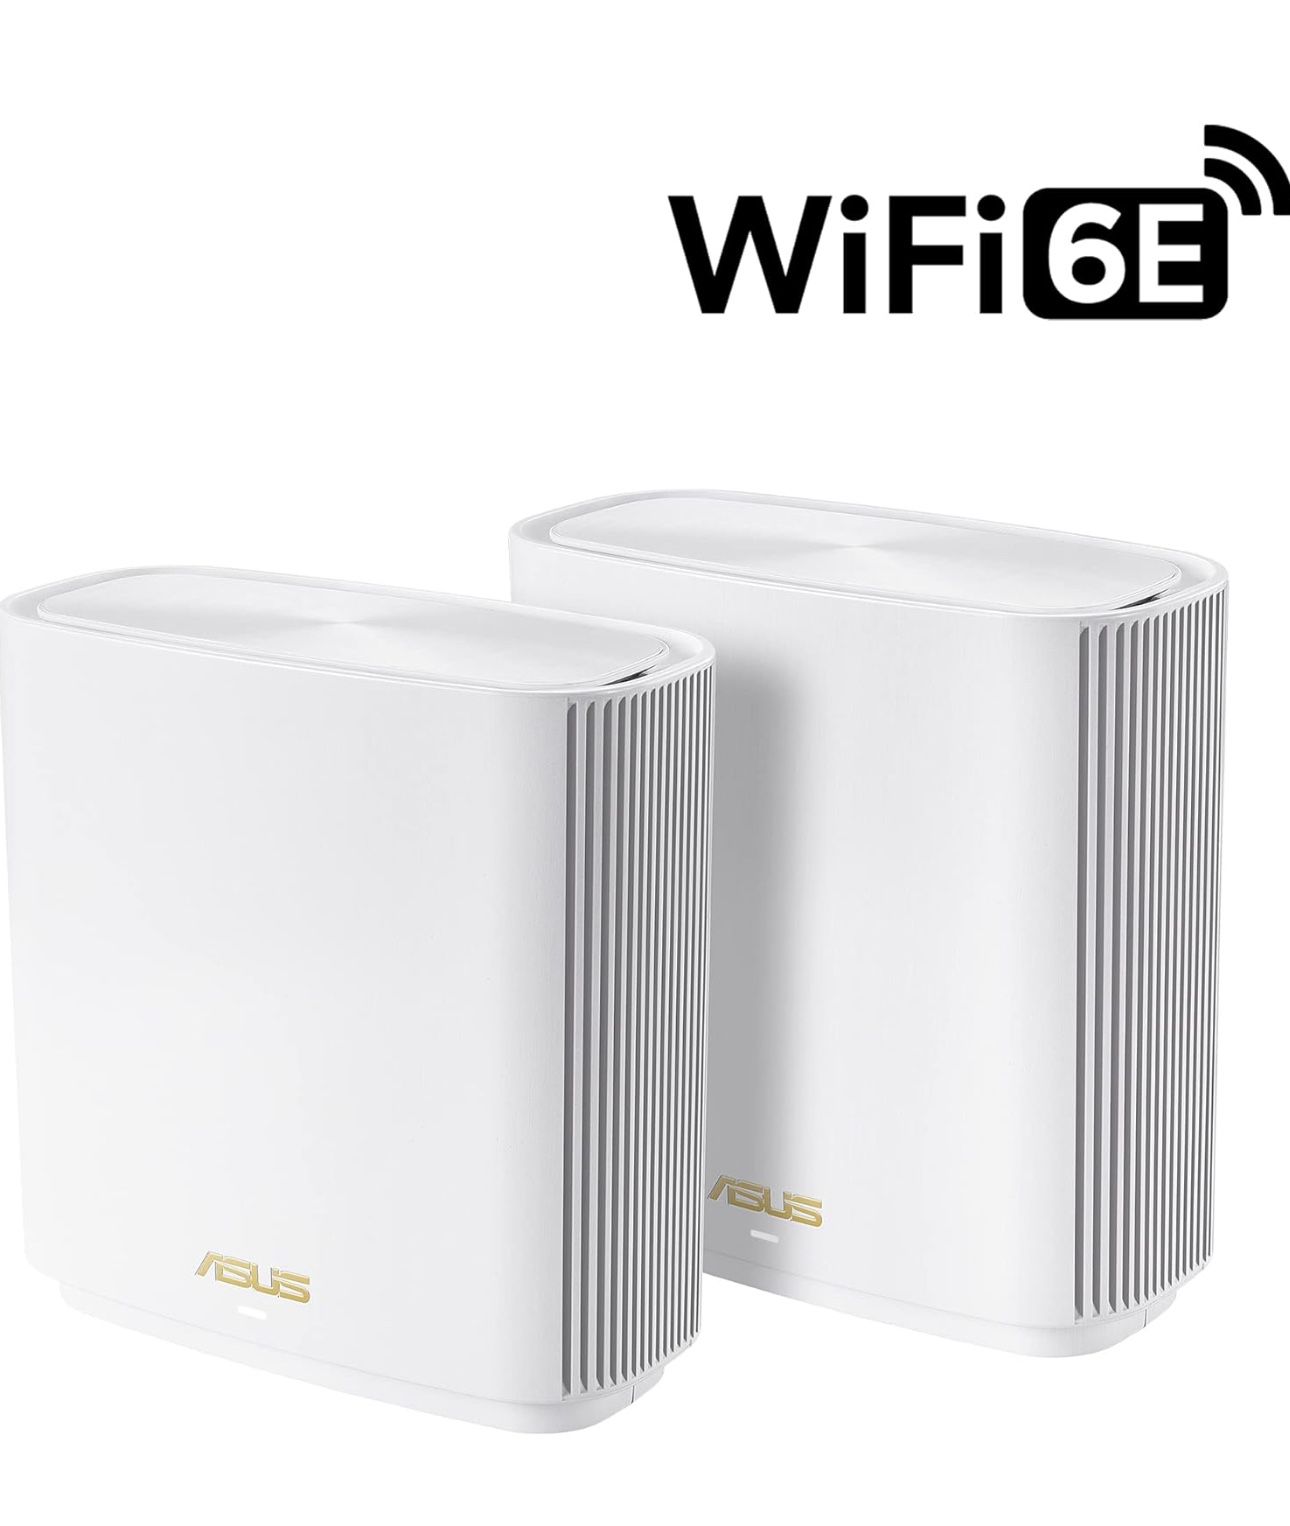 ASUS ET8 6E WiFi Mesh Network Internet Routers - Package of 7 Routers